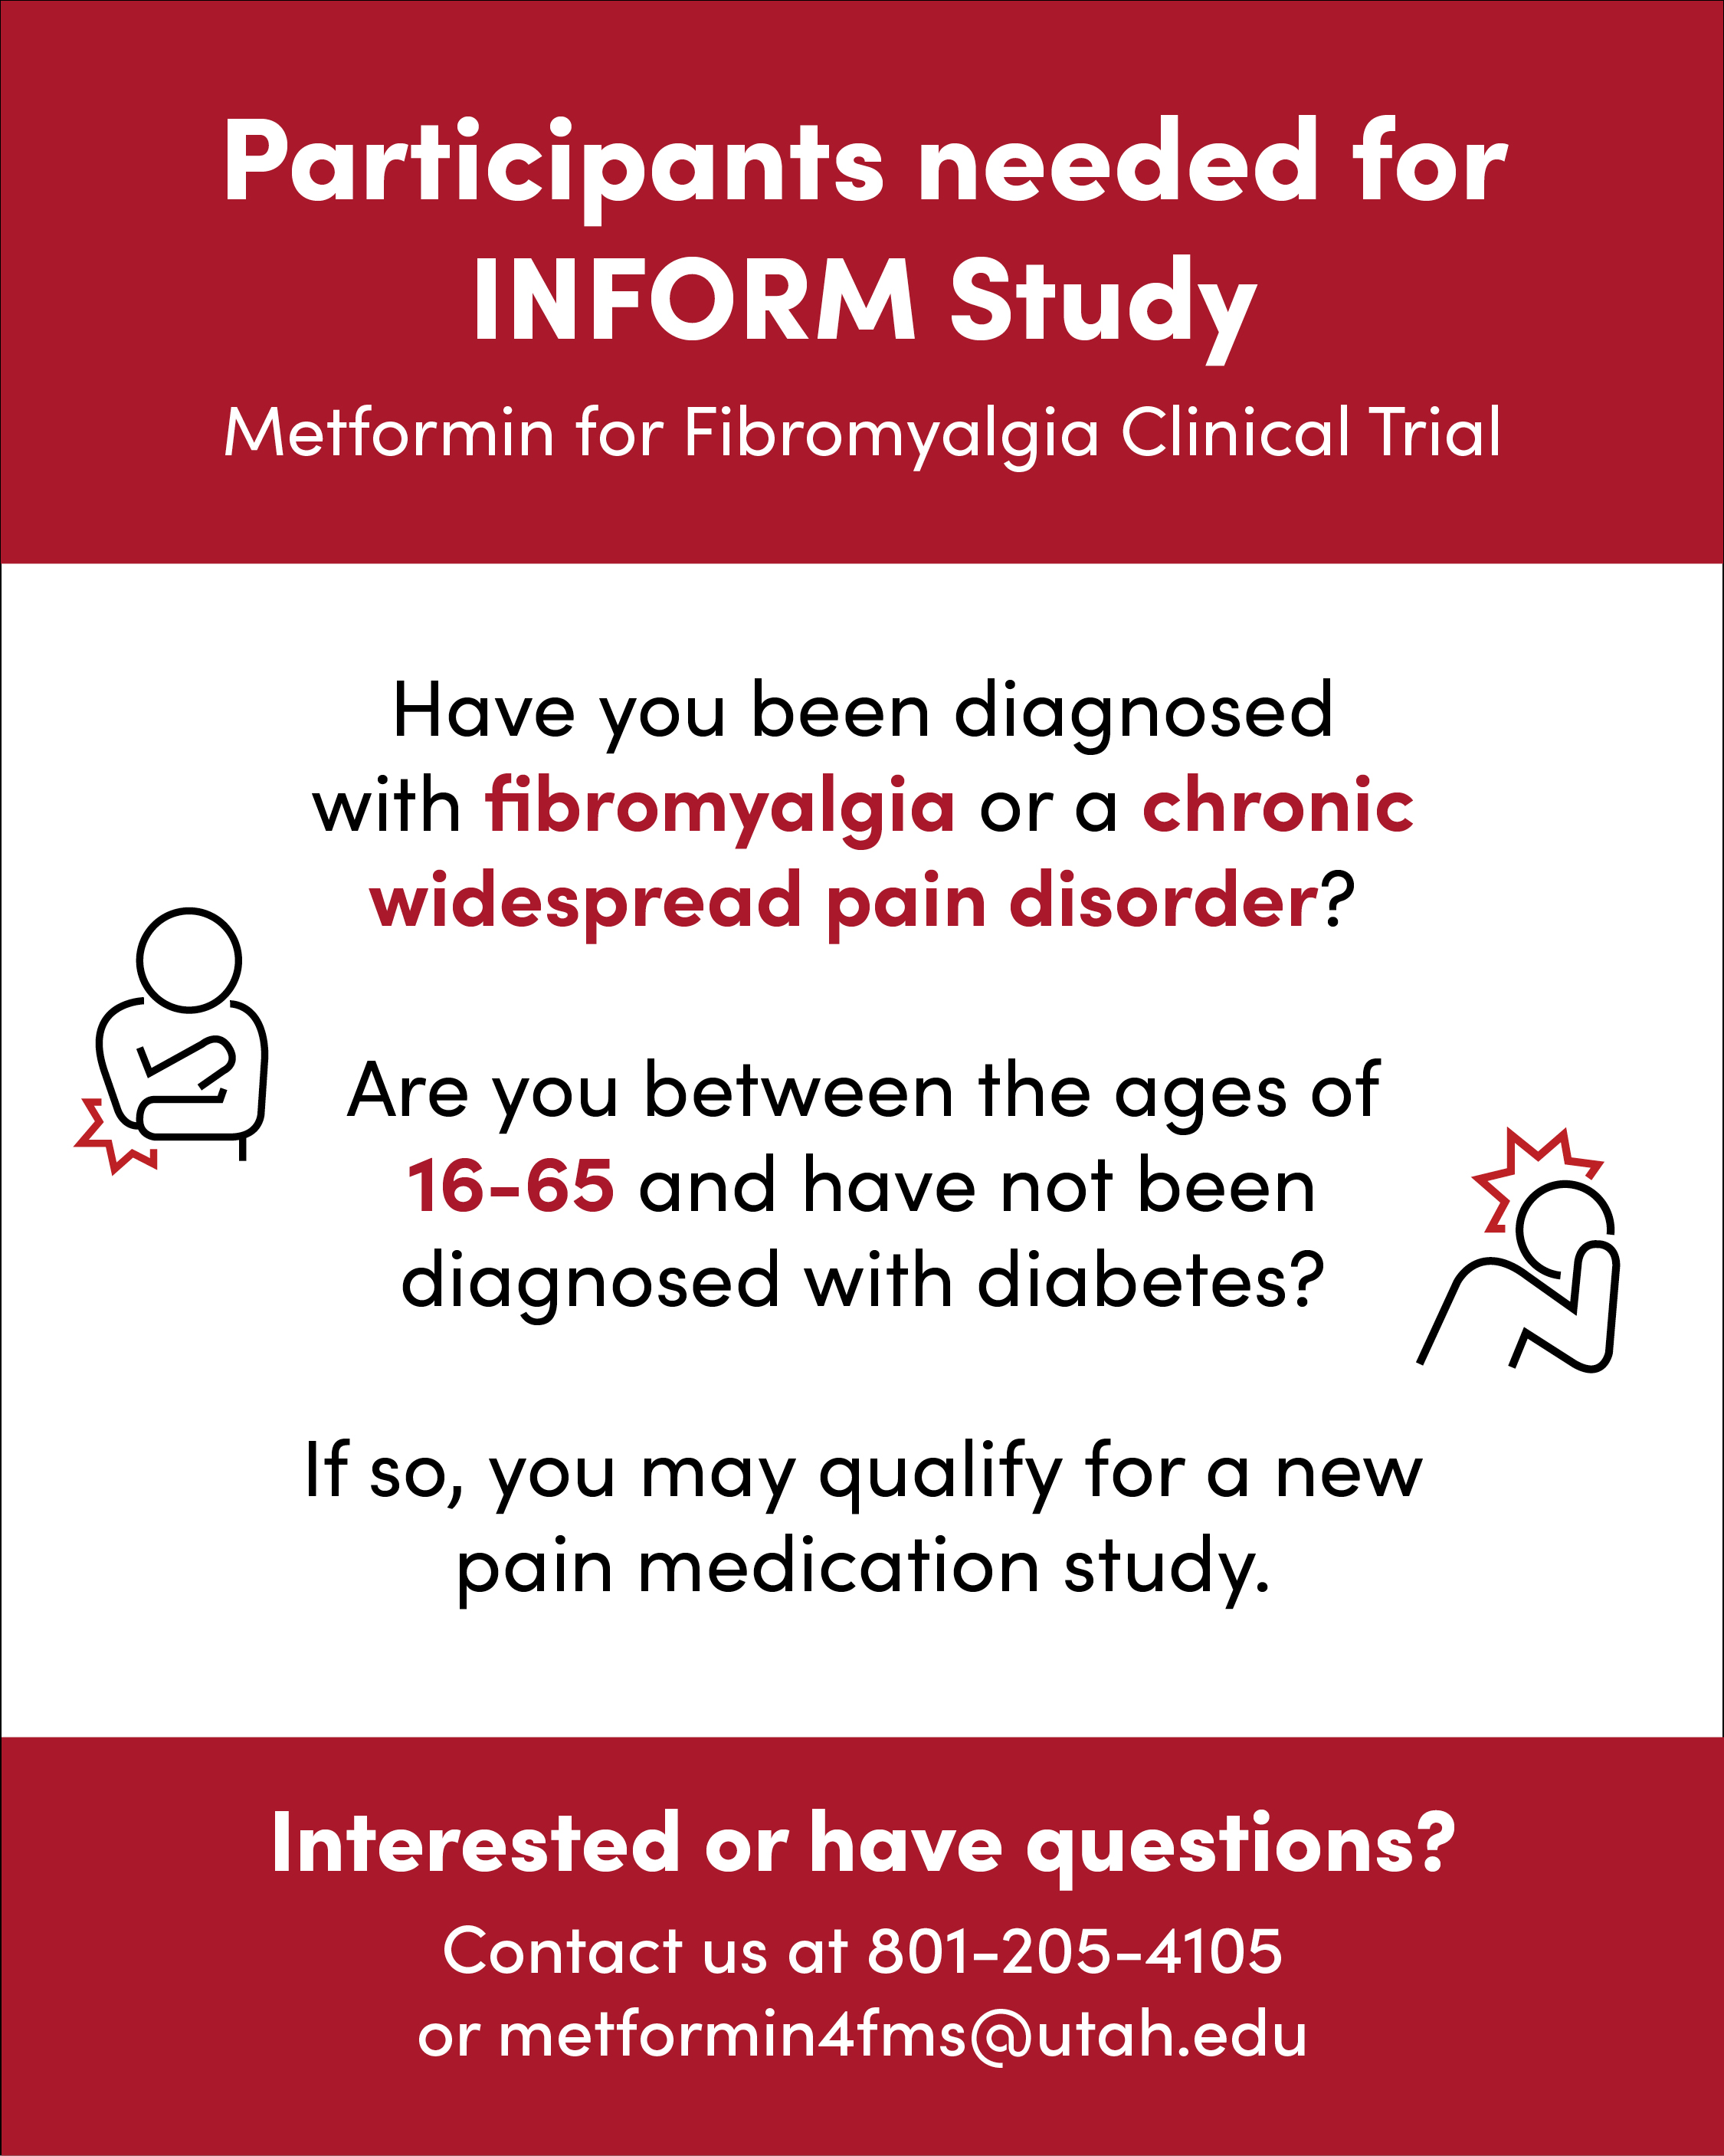 Participants needed for INFORM Study